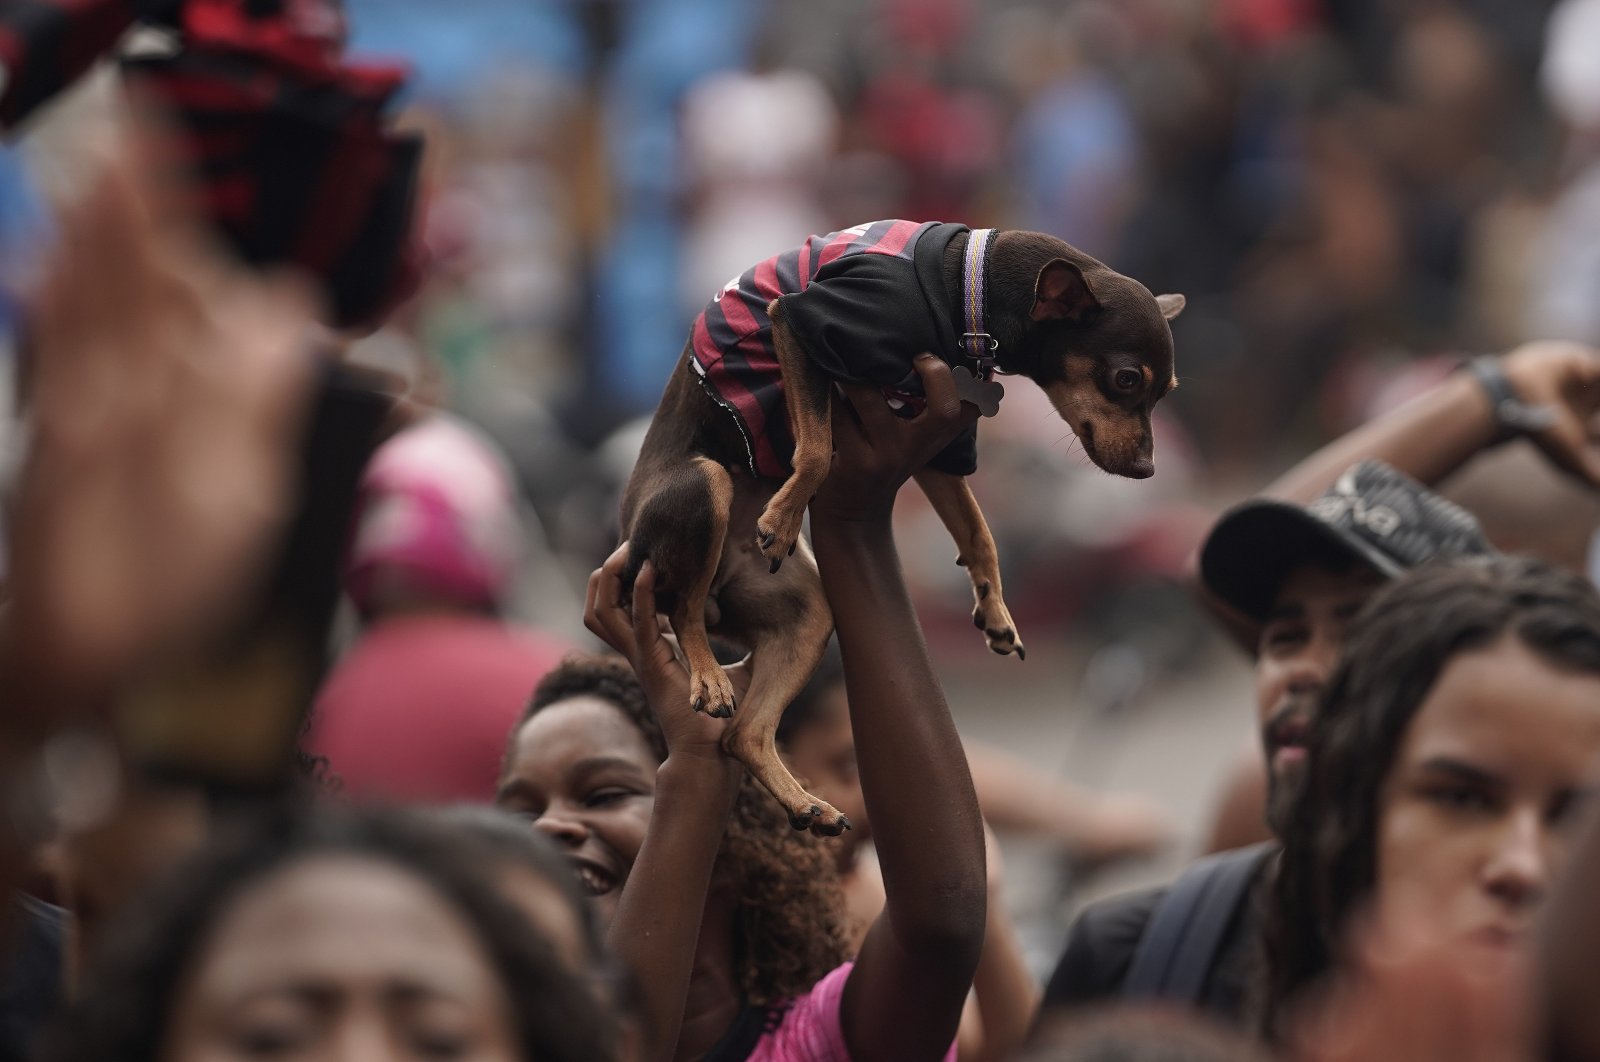 A fan of Brazil's Flamengo soccer team holds up her dog, wearing the colors of her team, after England's Liverpool scored a goal against Flamengo, during a live broadcast of the FIFA Club World Cup final soccer match, at the Rocinha slum in Rio de Janeiro, Brazil, Saturday, Dec. 21, 2019. (AP Photo)